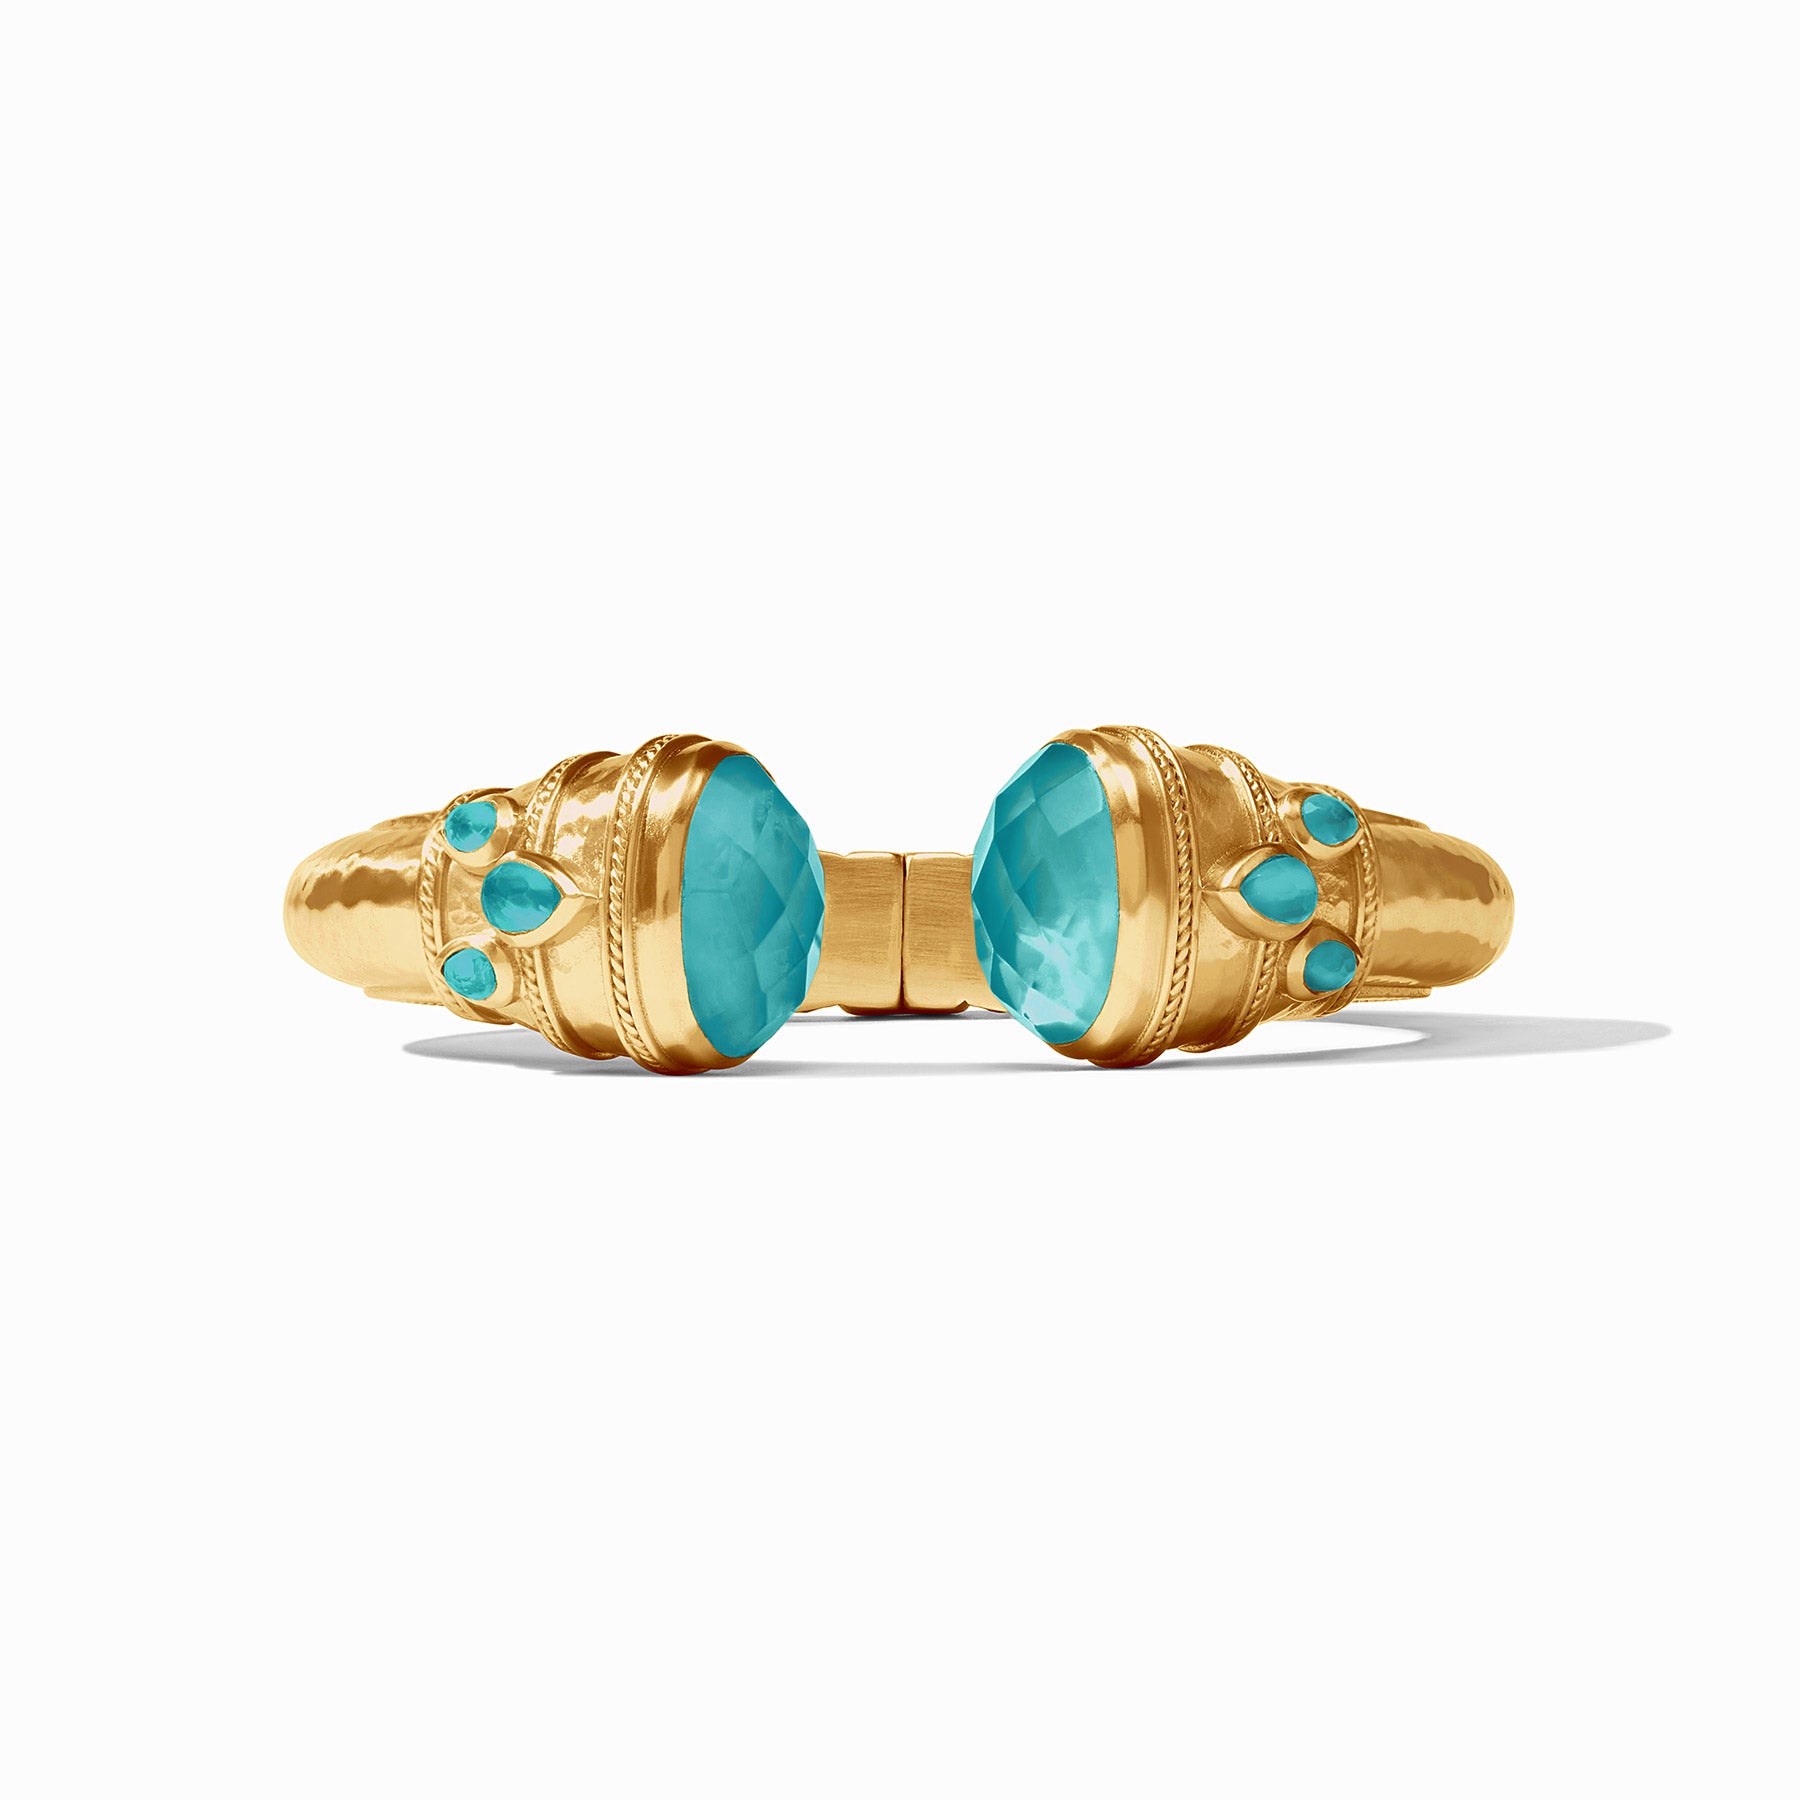 Julie Vos - Cannes Cuff, Iridescent Bahamian Blue / Small